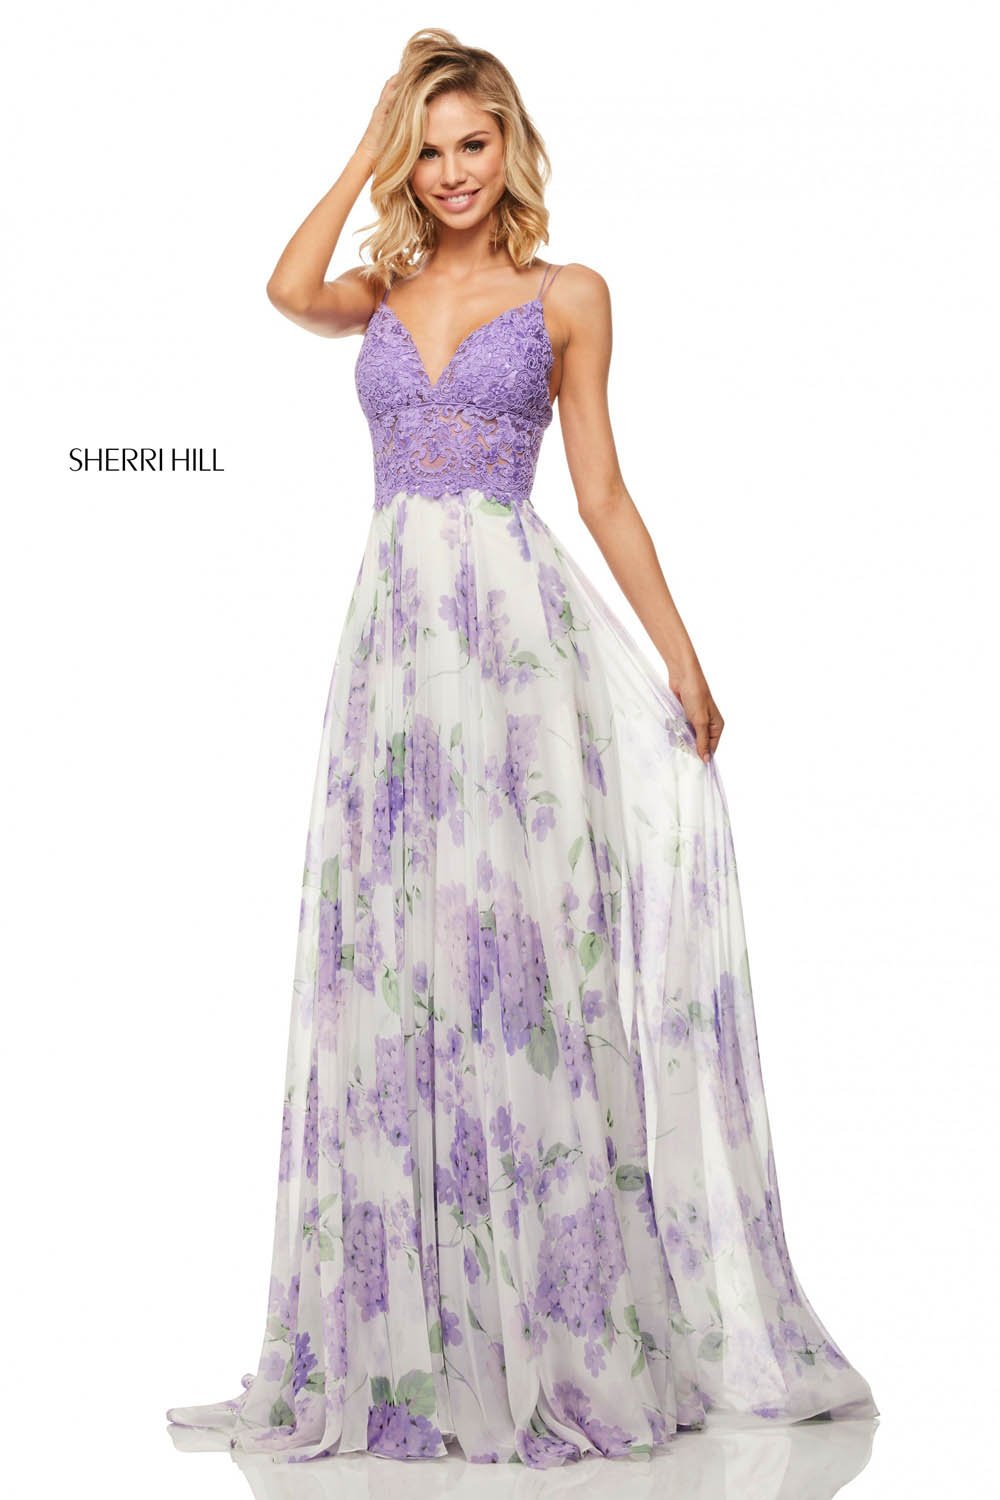 Sherri Hill 52857 dress images in these colors: Light Blue Ivory Print, Pink Ivory Print, Lilac Ivory Print.